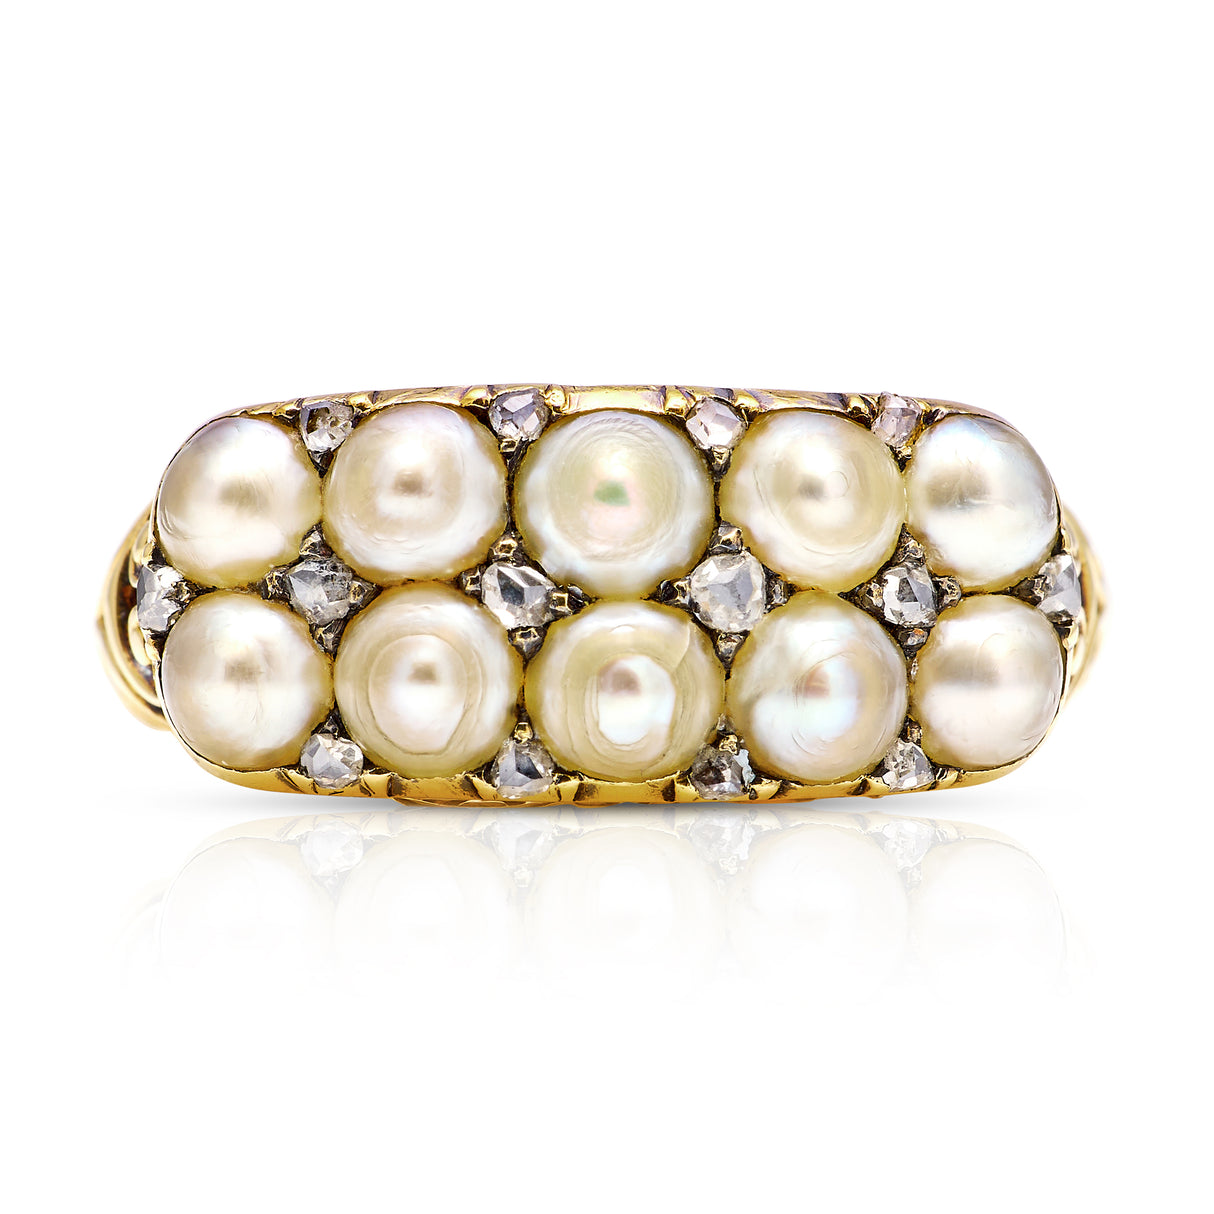 Antique, Victorian Double Row Pearl & Diamond Ring, 15ct Yellow Gold